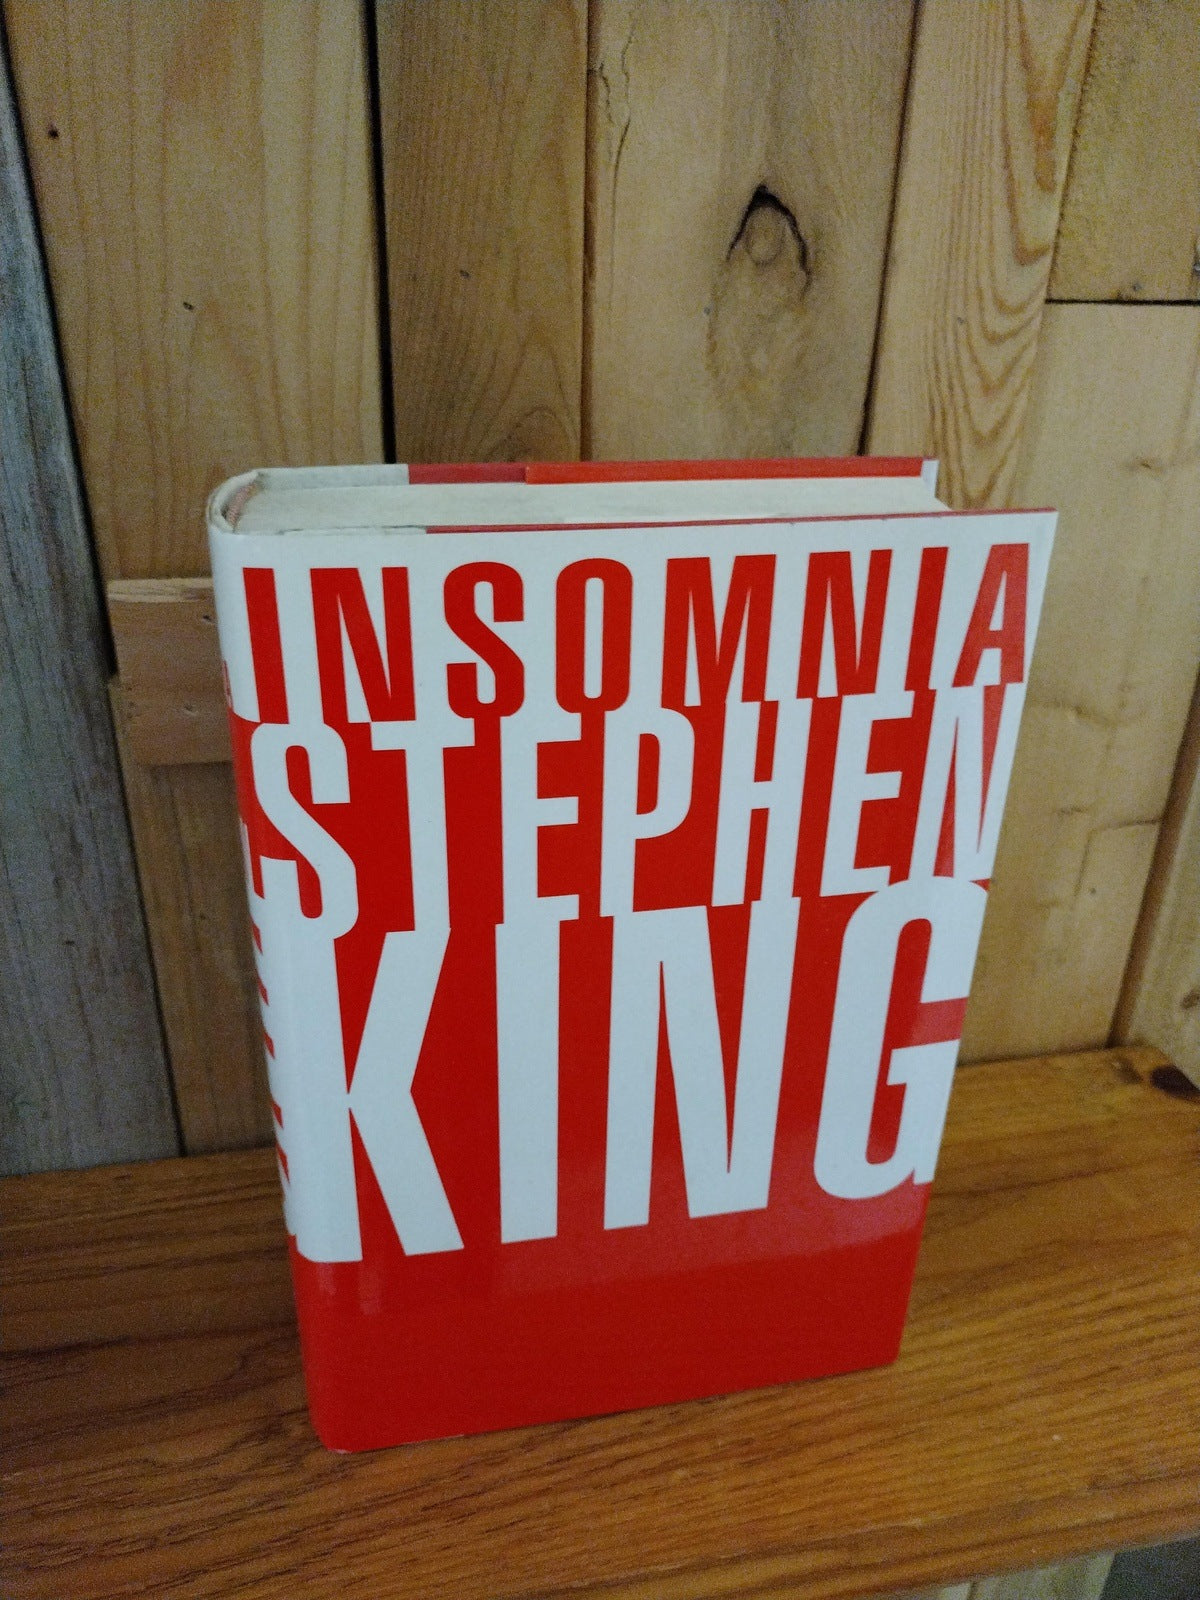 Stephen King Insomnia Hardcover First Edition Good Condition 556152HC